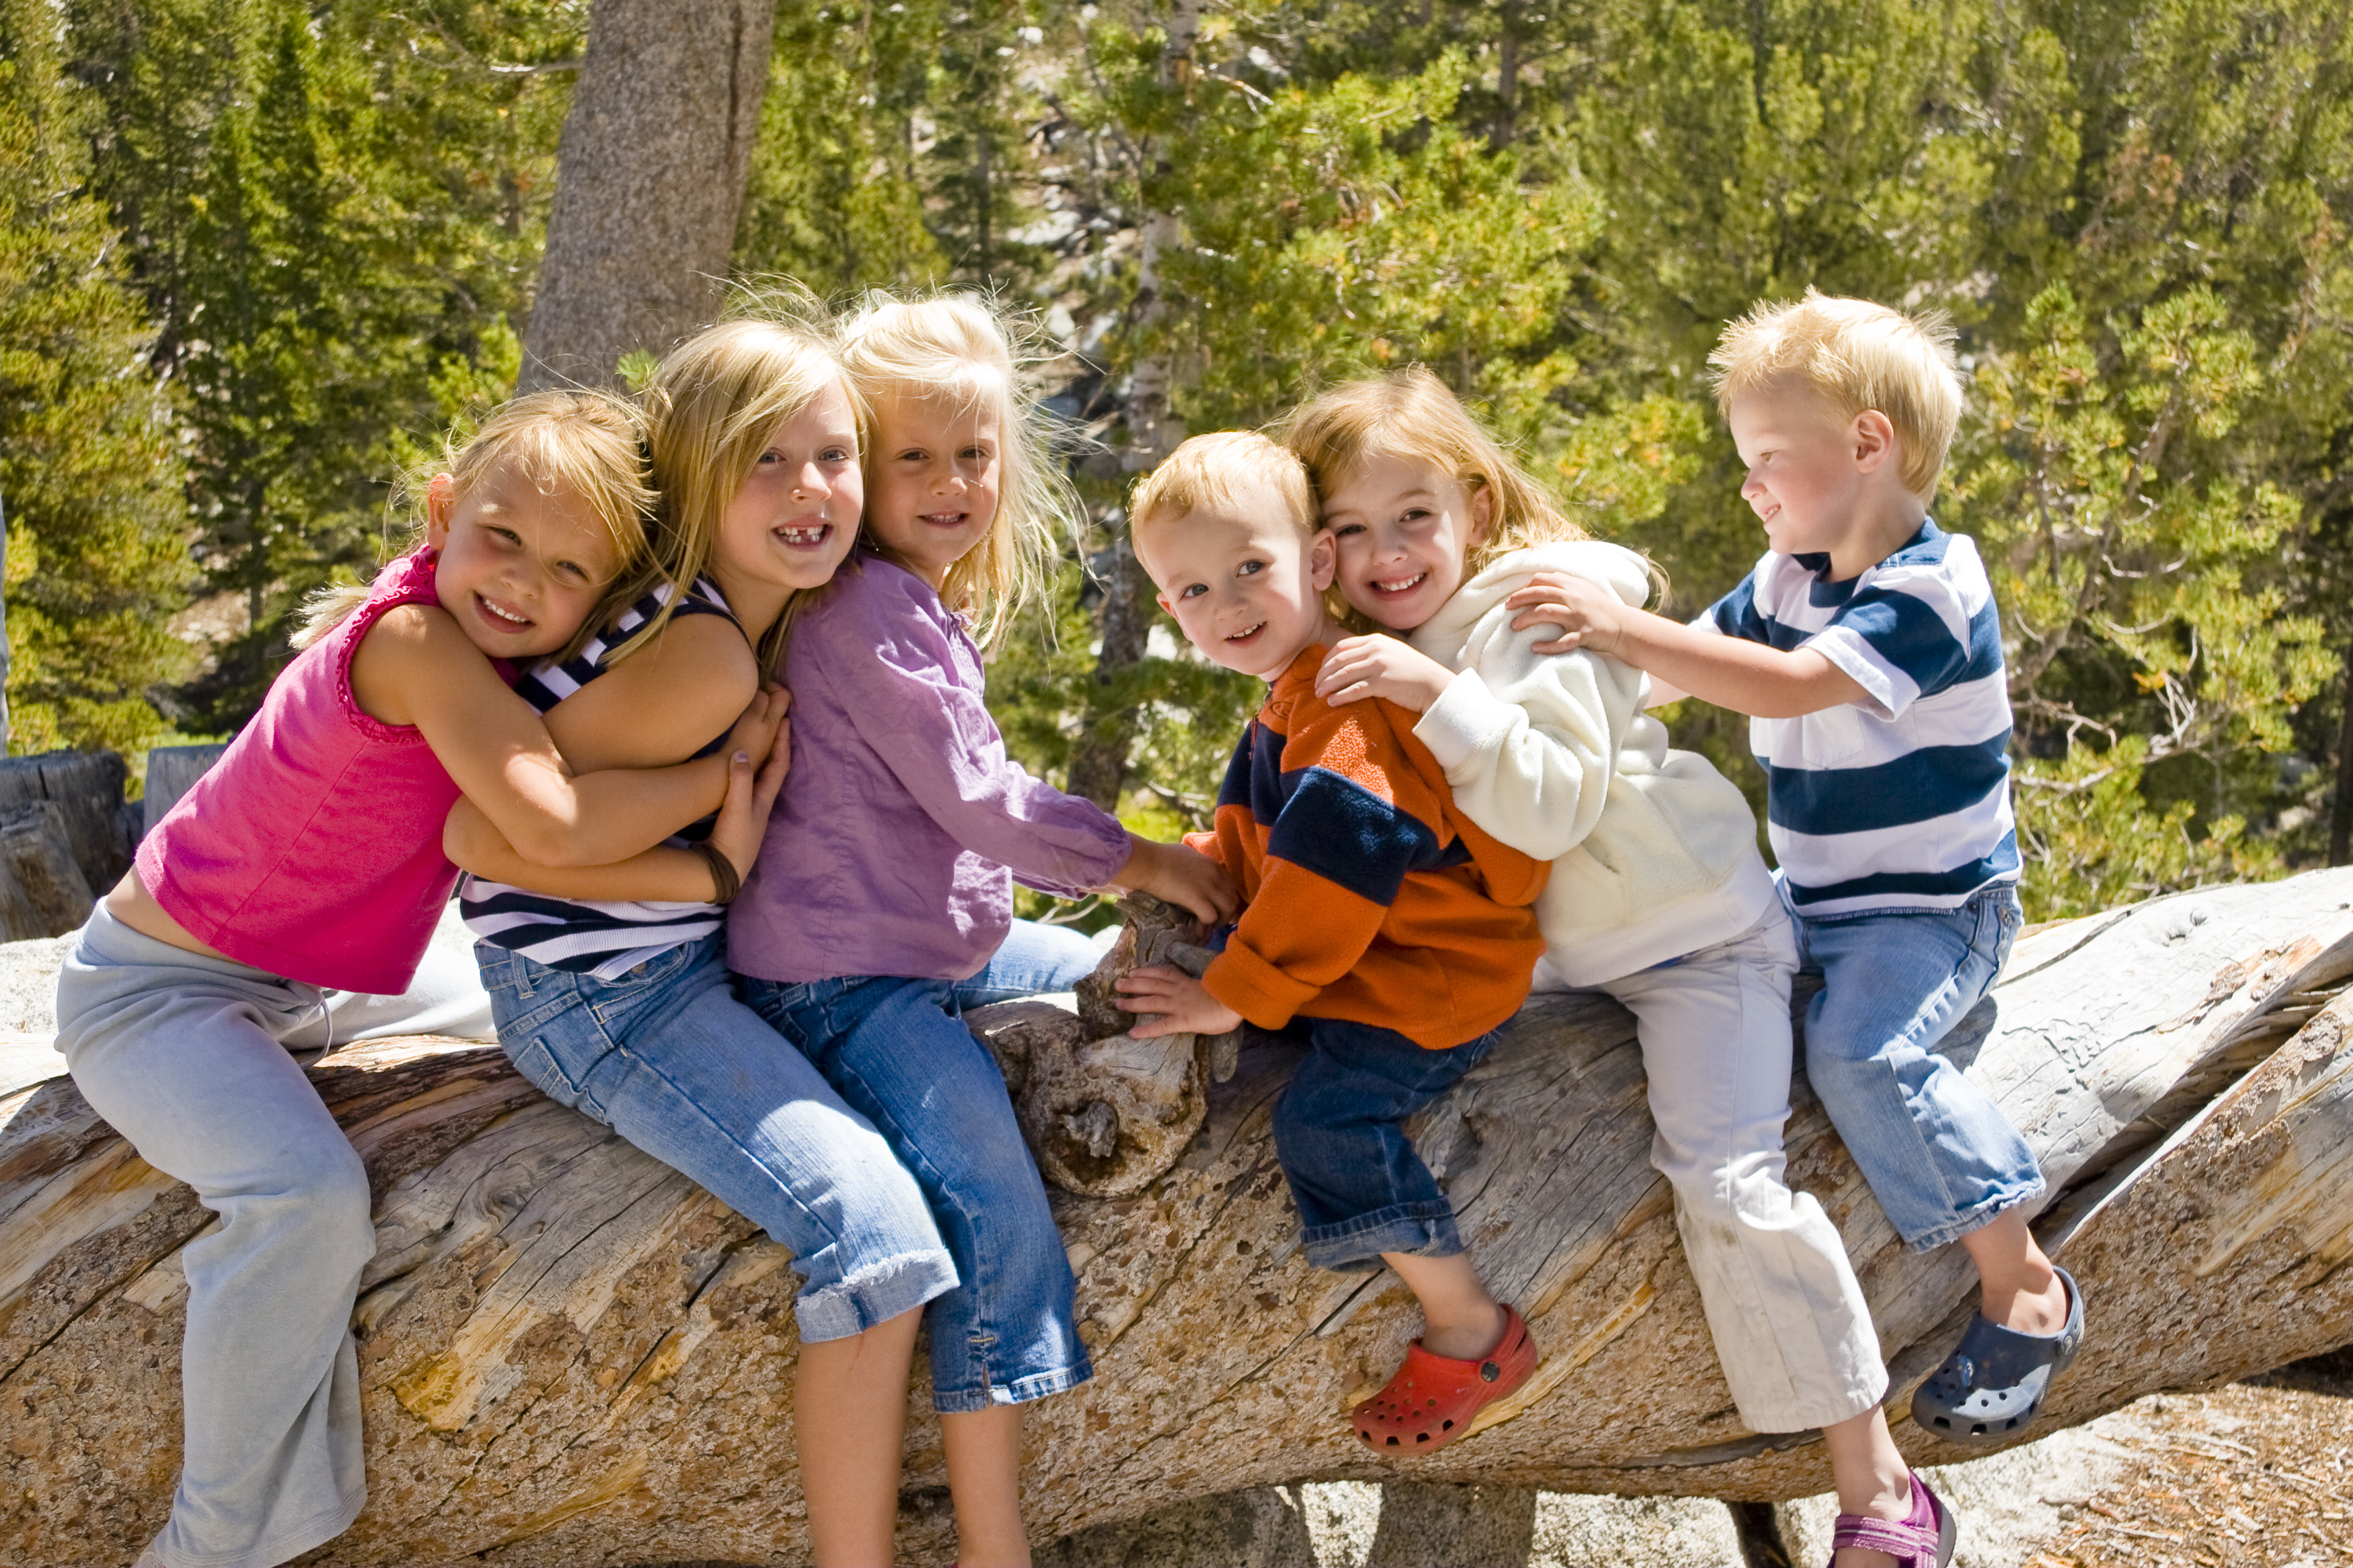 Five children smiling and sitting close together on a large tree log outdoors